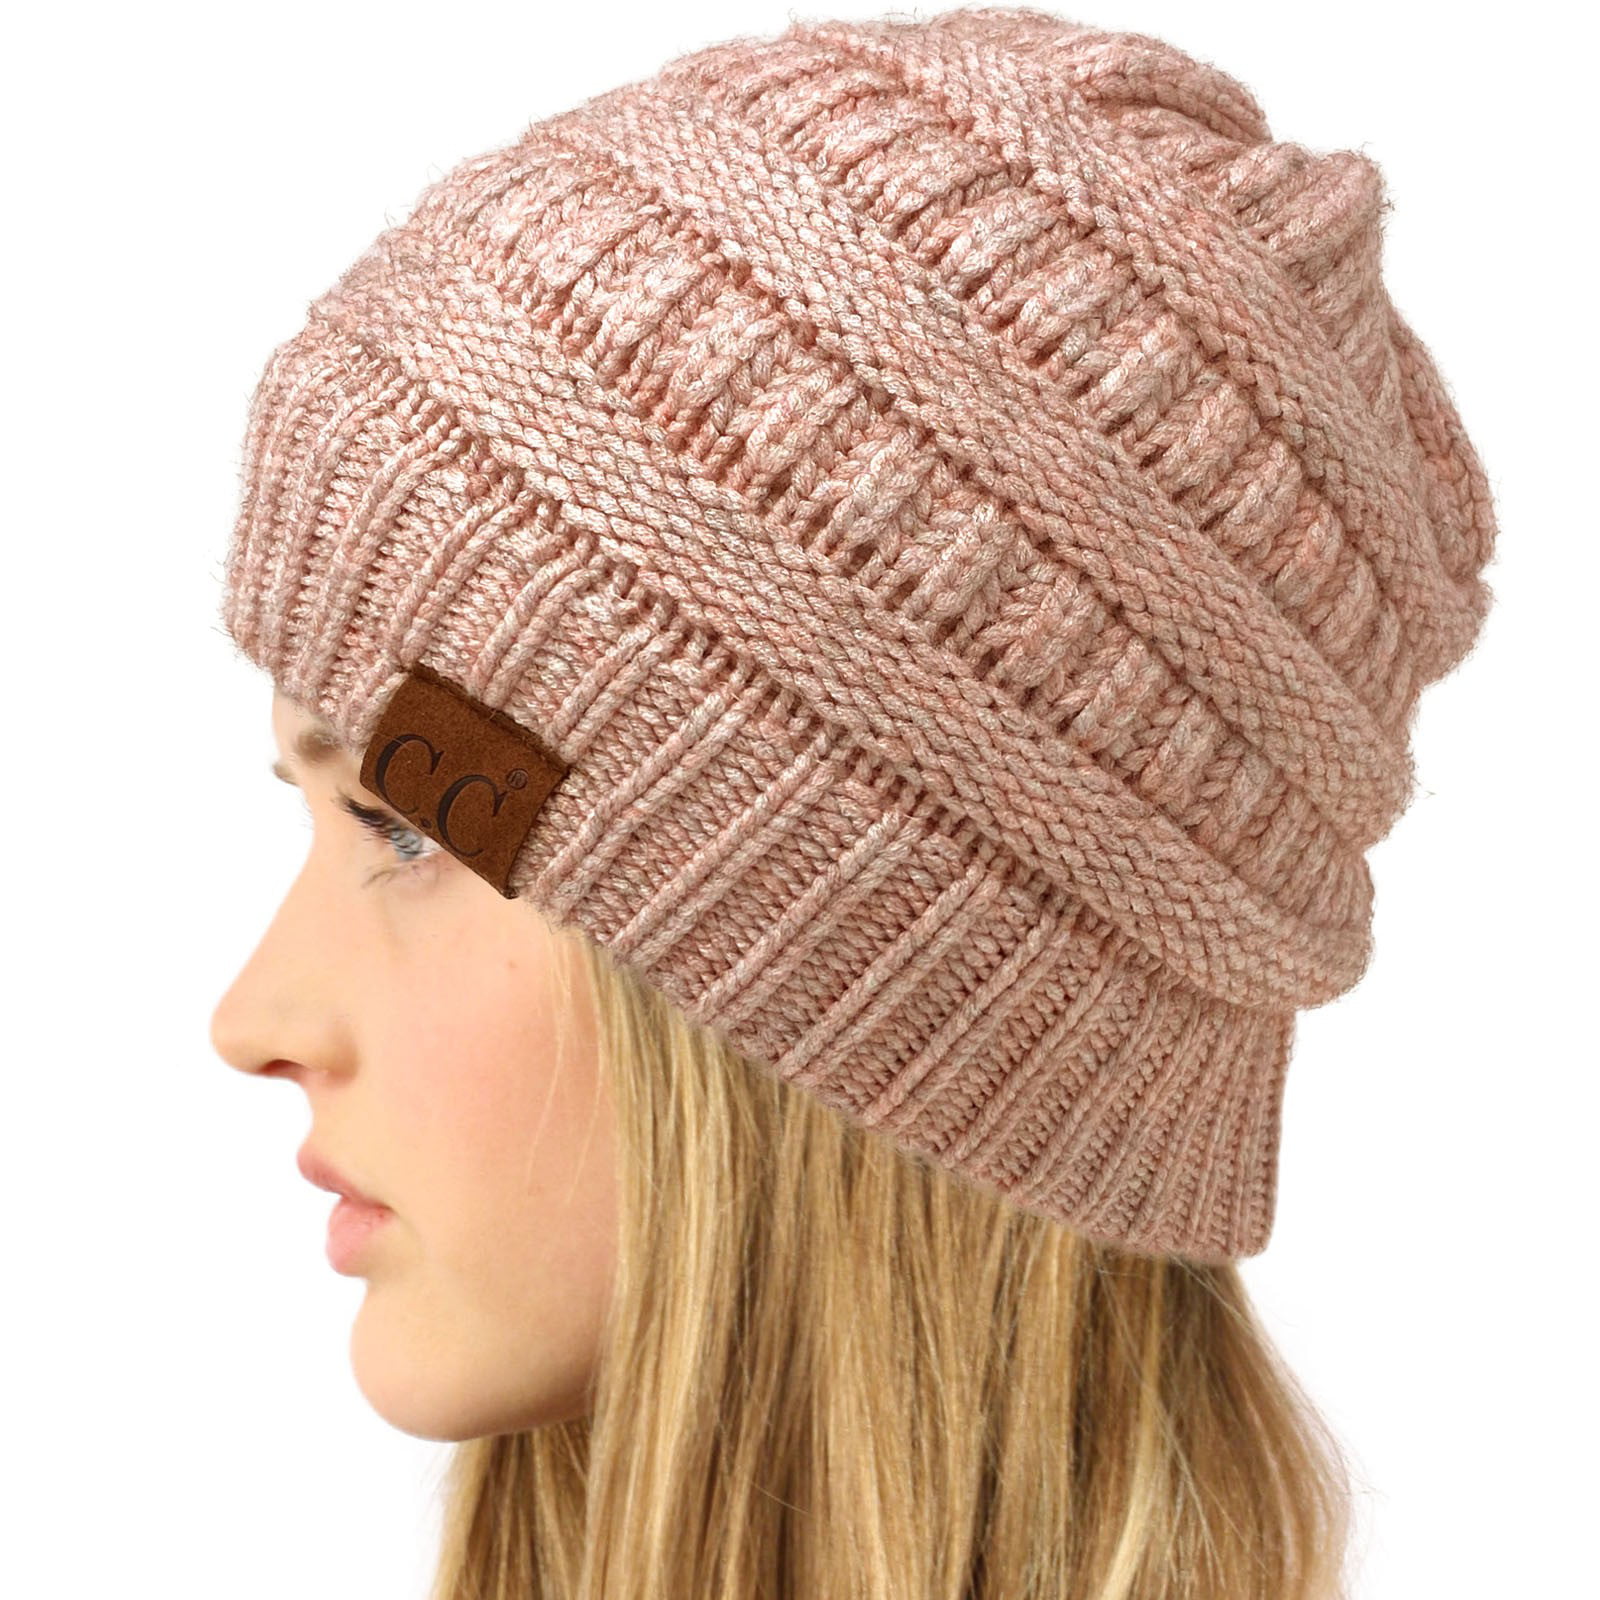 CC Winter Trendy Soft Cable Knit Stretchy Warm Ribbed Beanie Skully Ski Hat Cap 